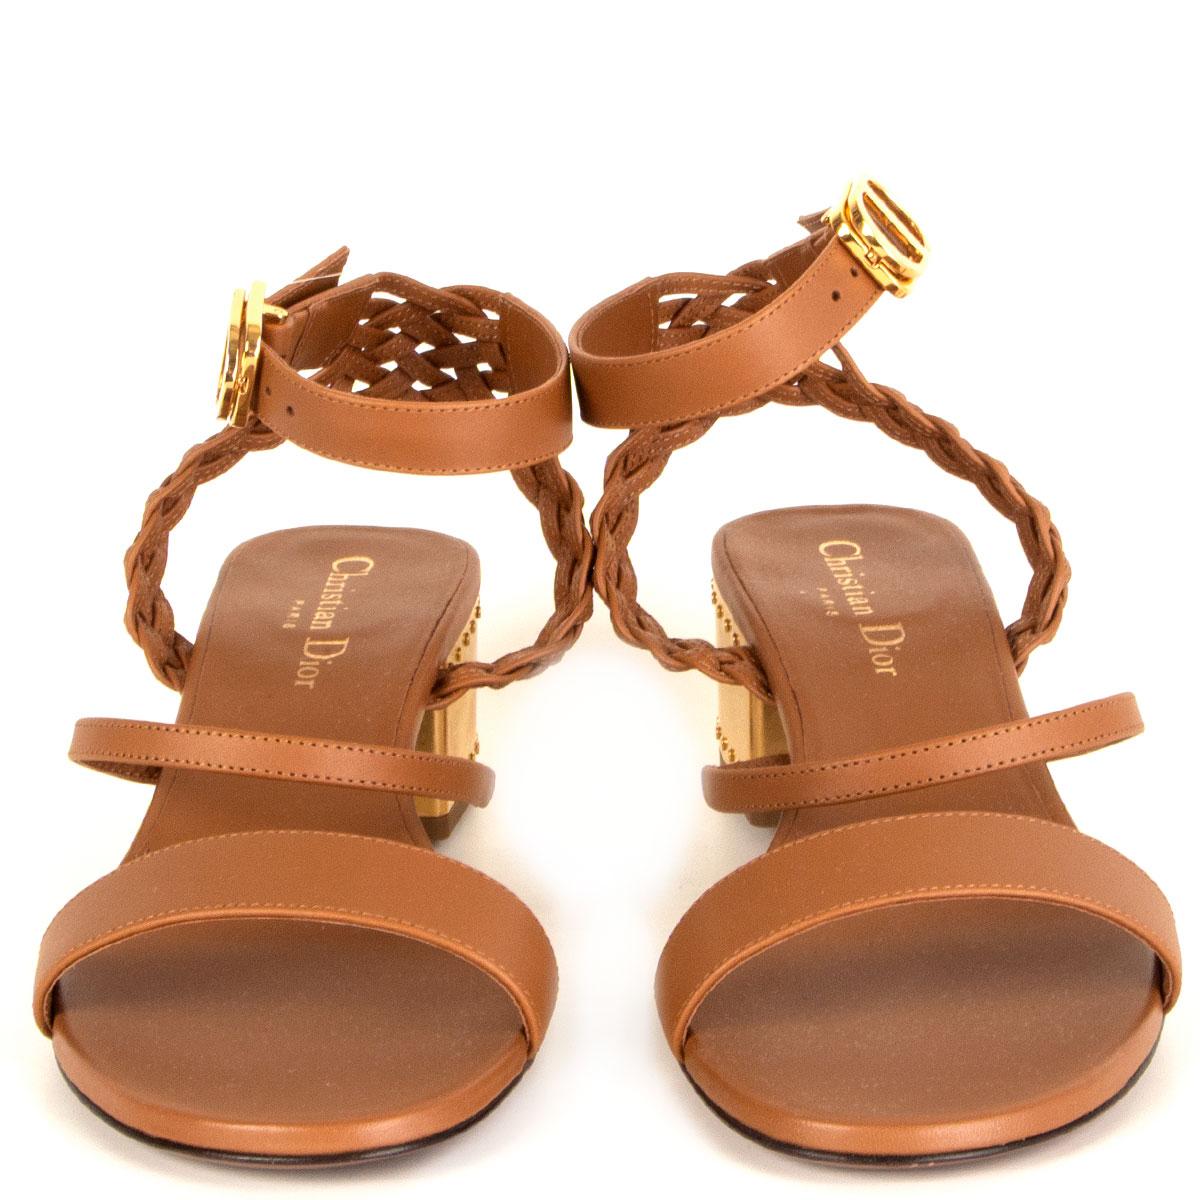 100% authentic Christian Dior Égéé ankle-strap block-heel sandals in cognac brown calfskin embellished with a braided detail on the back, gold-tone metal heel and CD buckle closure. Brand new. Come with dust bag. 

Measurements
Imprinted